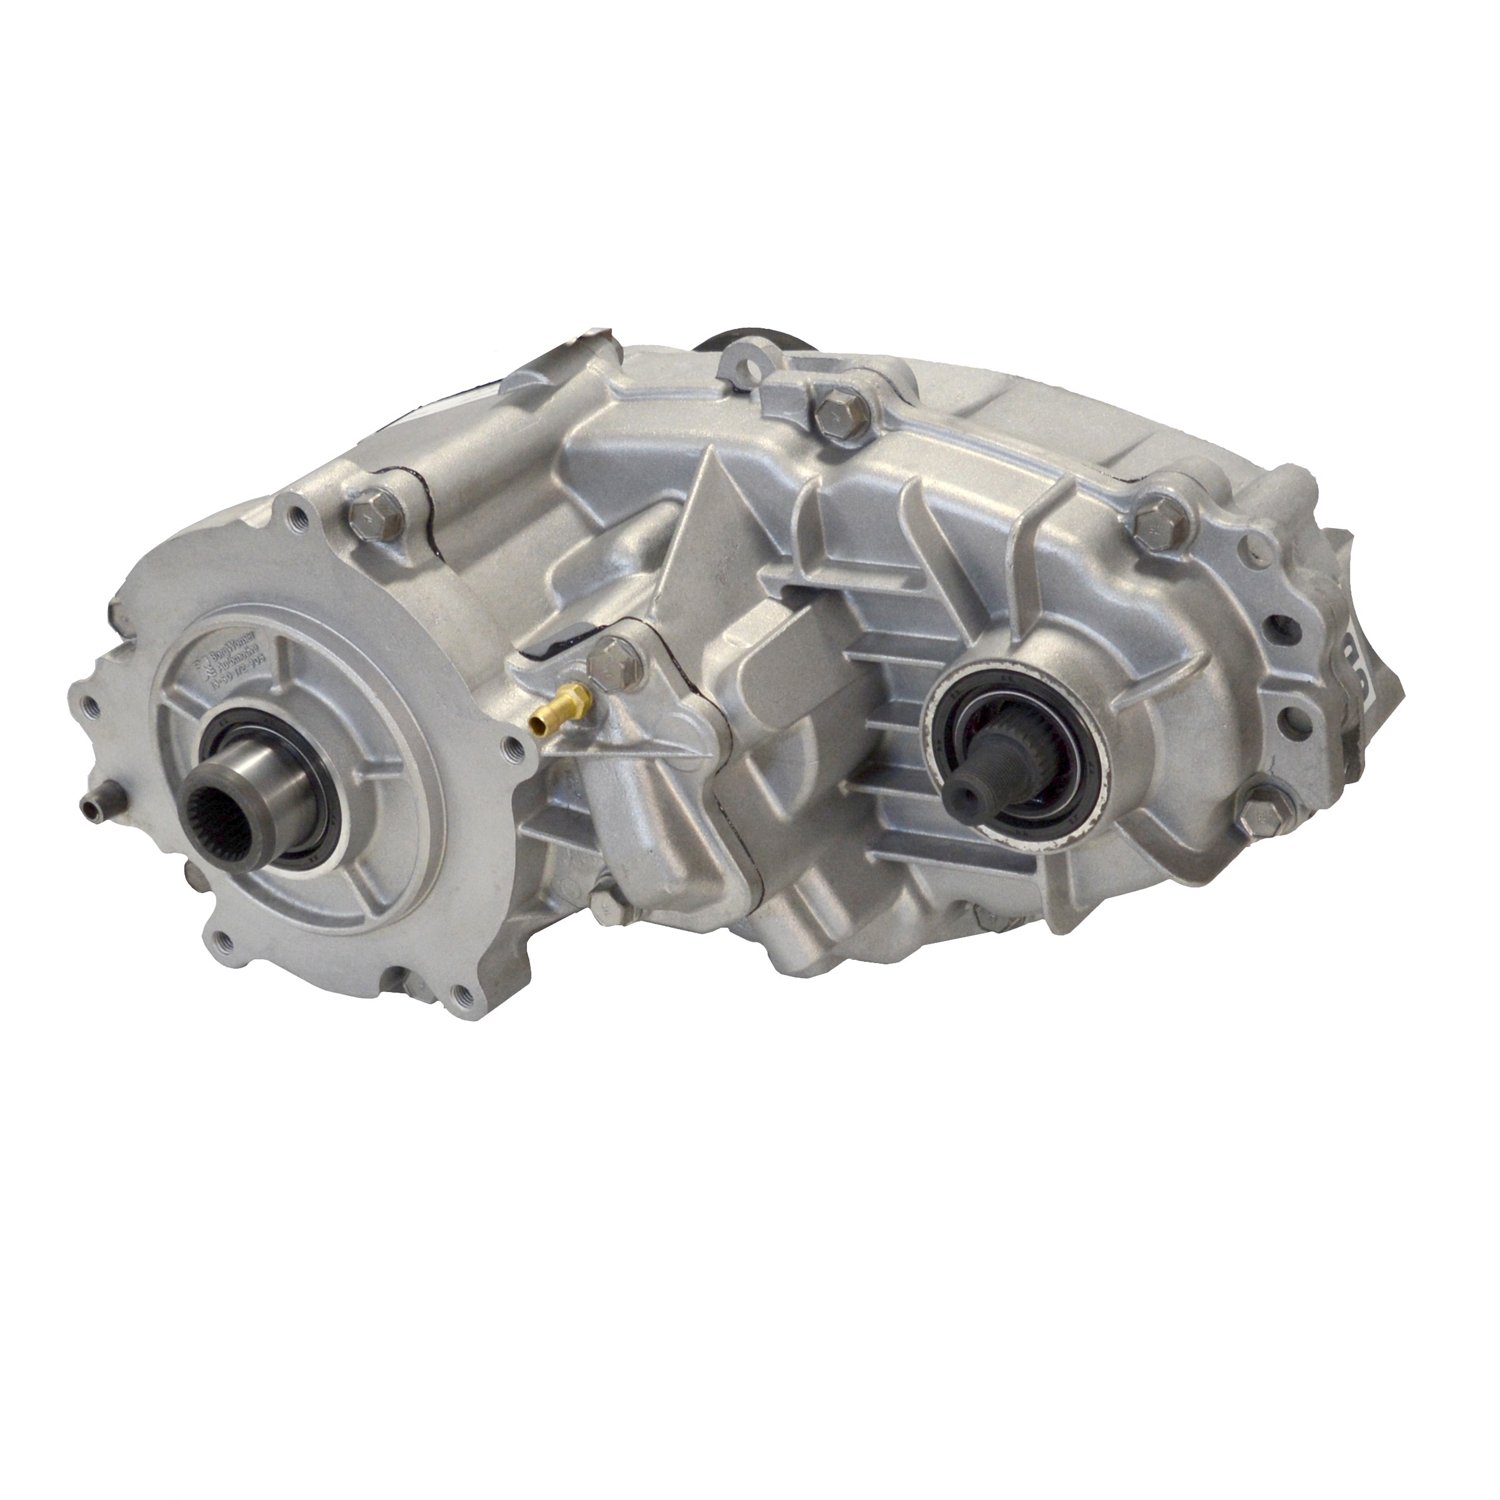 Remanufactured BW4405 Transfer Case for Ford 98-01 Explorer & Mountaineer